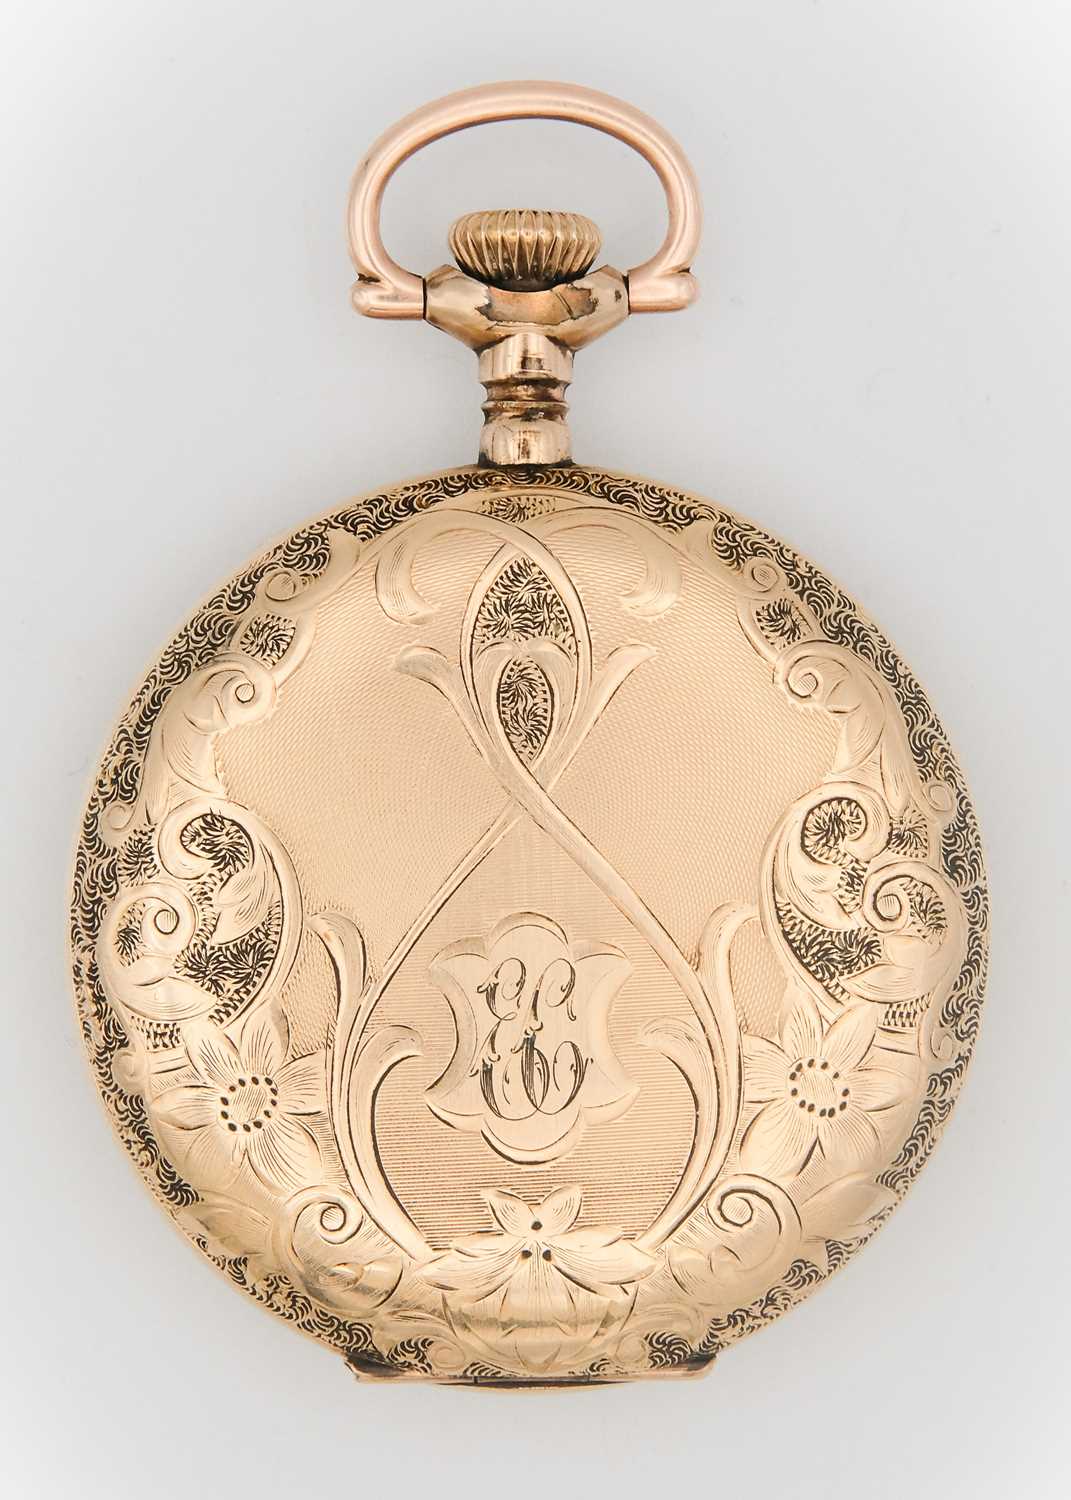 WALTHAM - A gold-plated full hunter crown wind lever pocket watch. - Image 4 of 4